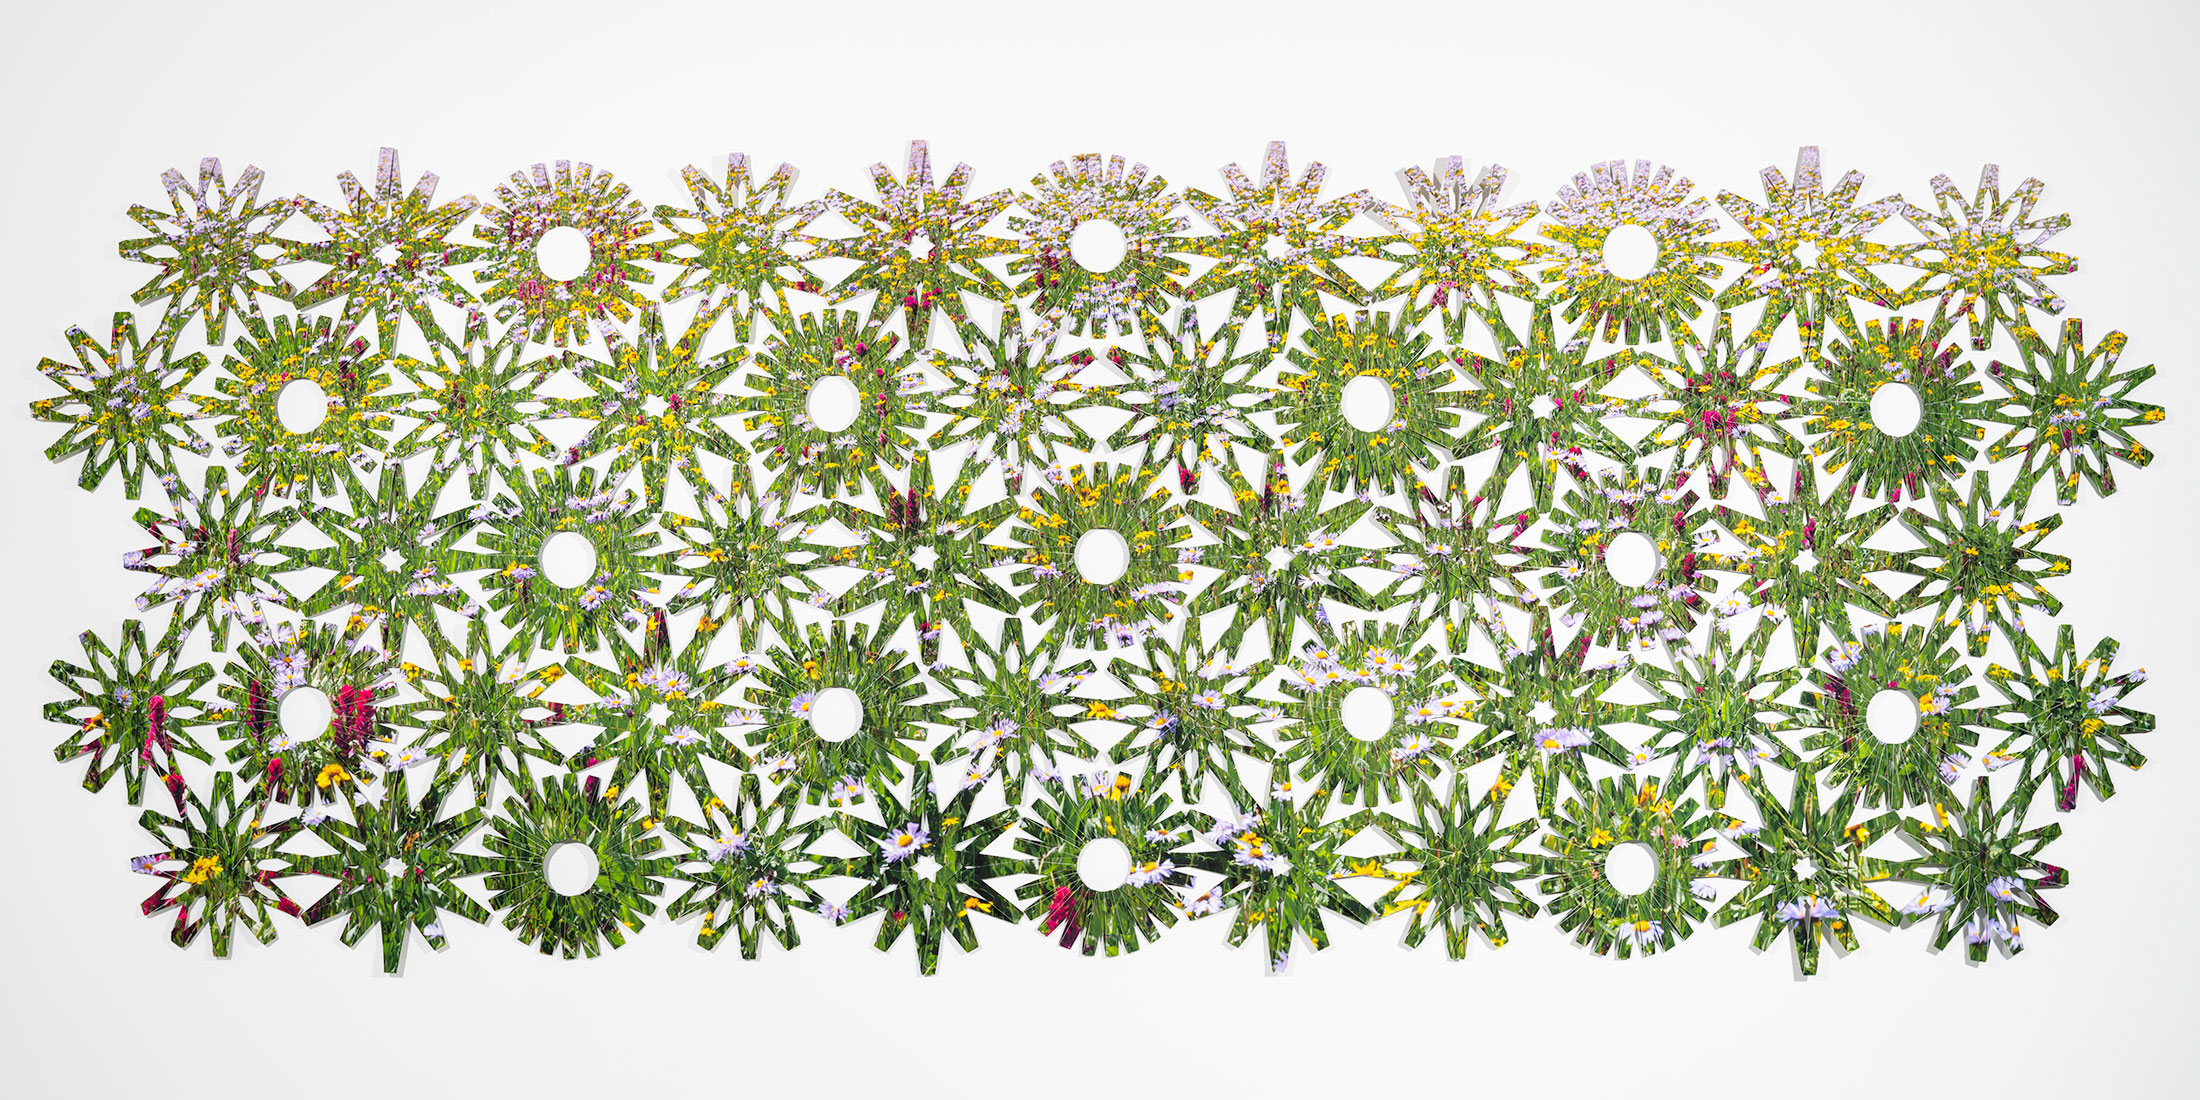 Folded Photographic net of alpine wildflower field featuring Arnica, Aster, and Castilleja flowers. The photograph has been printed, folded, and knit into the form of a net. The pattern of the net reflects the petal pattern of the flowers in the original image.